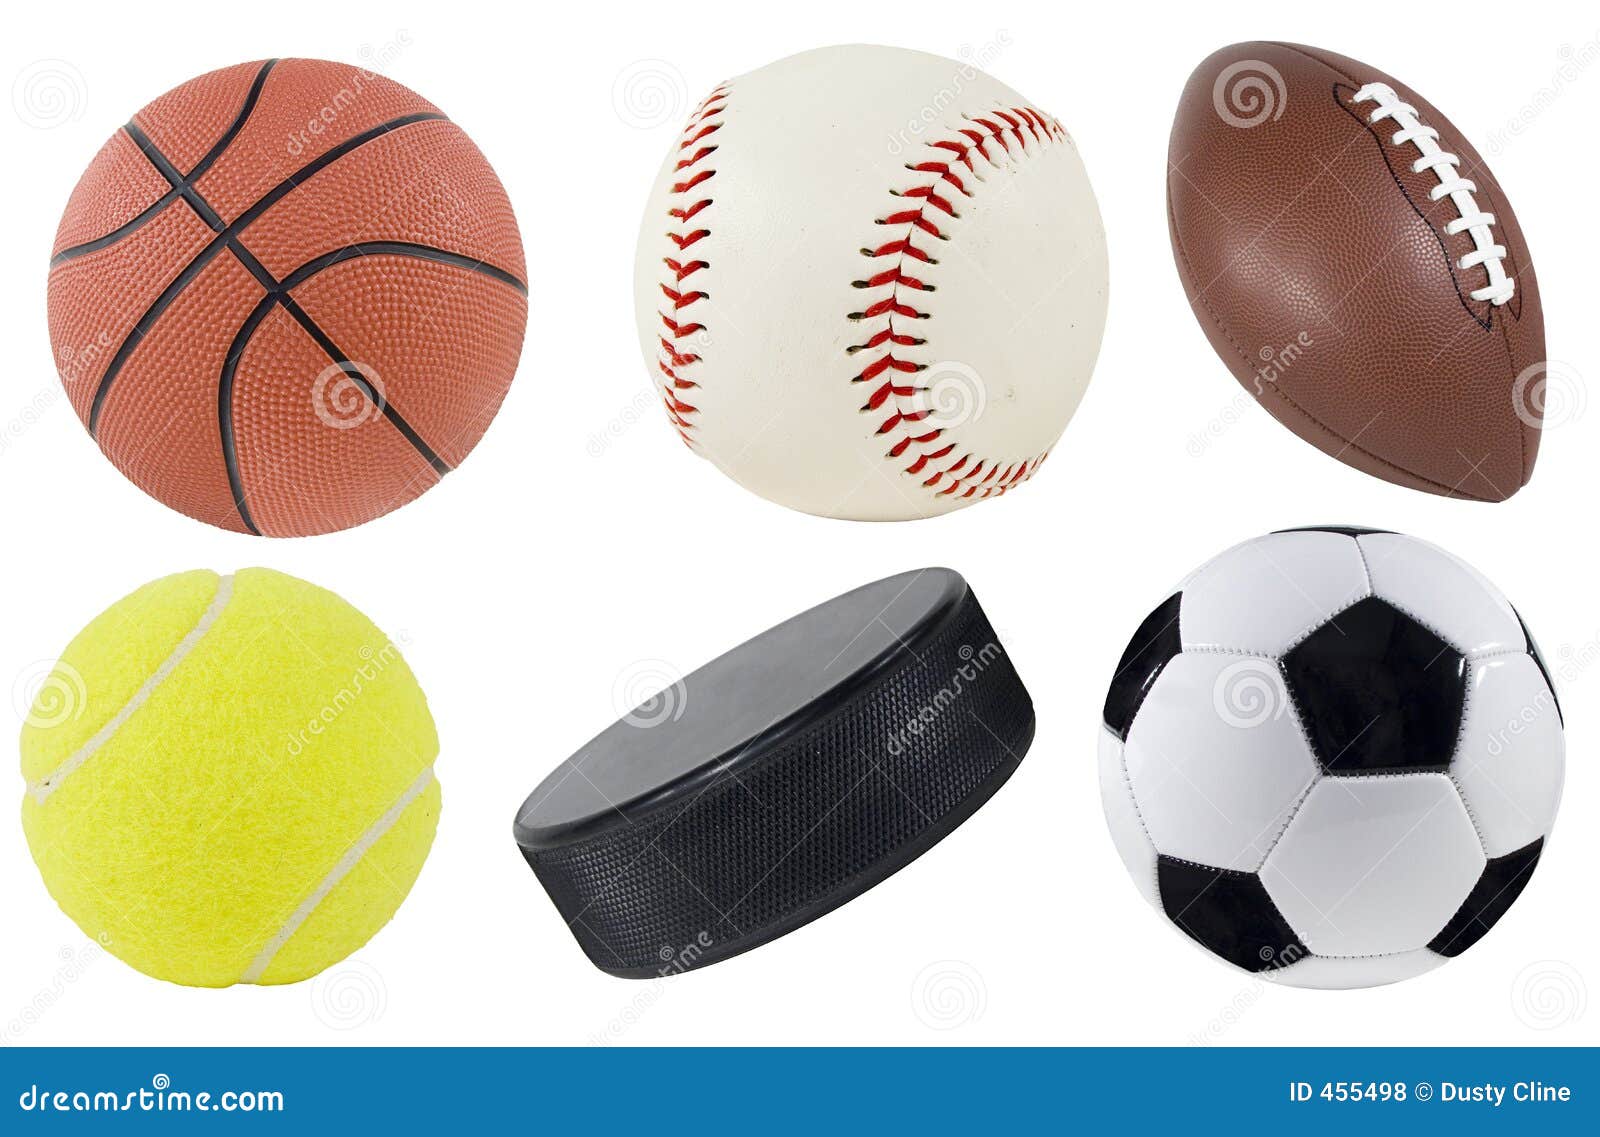 free clipart of sports equipment - photo #29